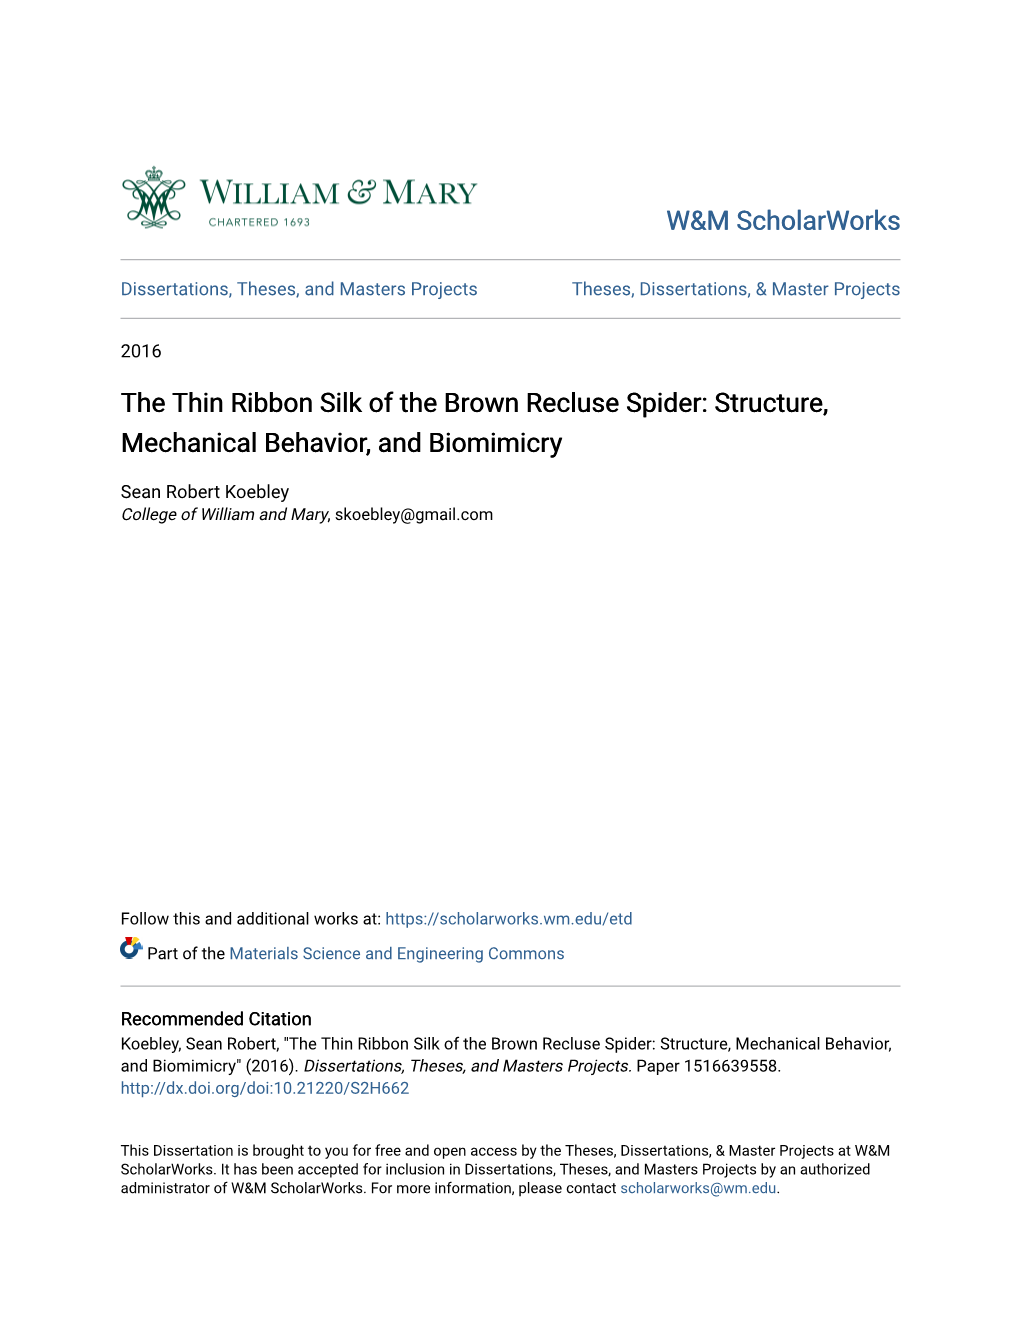 The Thin Ribbon Silk of the Brown Recluse Spider: Structure, Mechanical Behavior, and Biomimicry